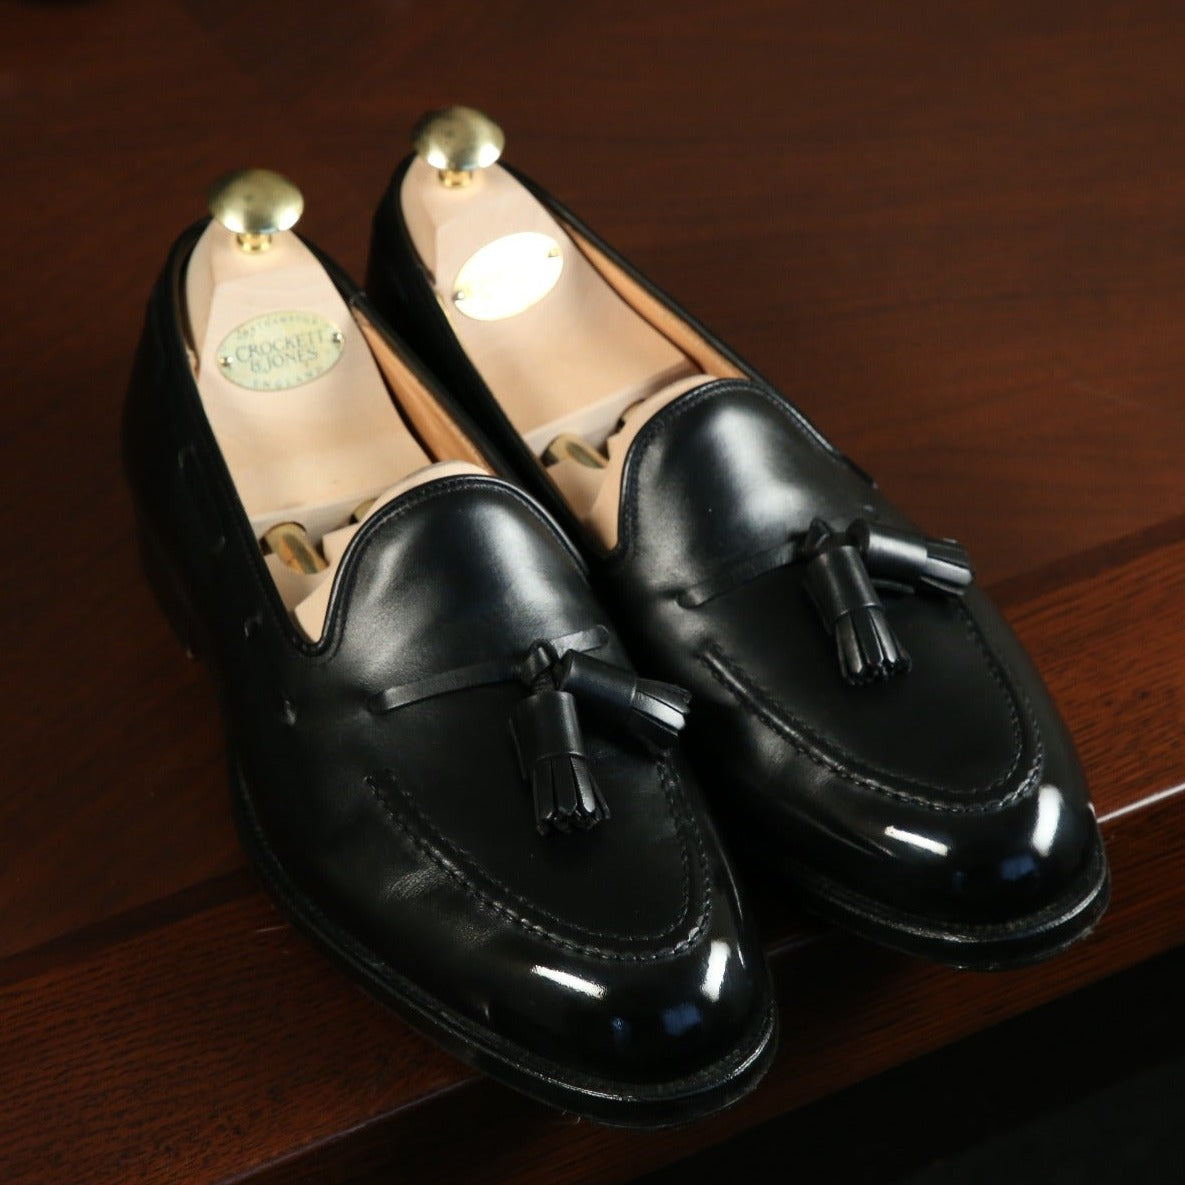 A pair of High Shine Service shoes from KirbyAllison.com with tassels sitting on a desk, highlighting shoe care.